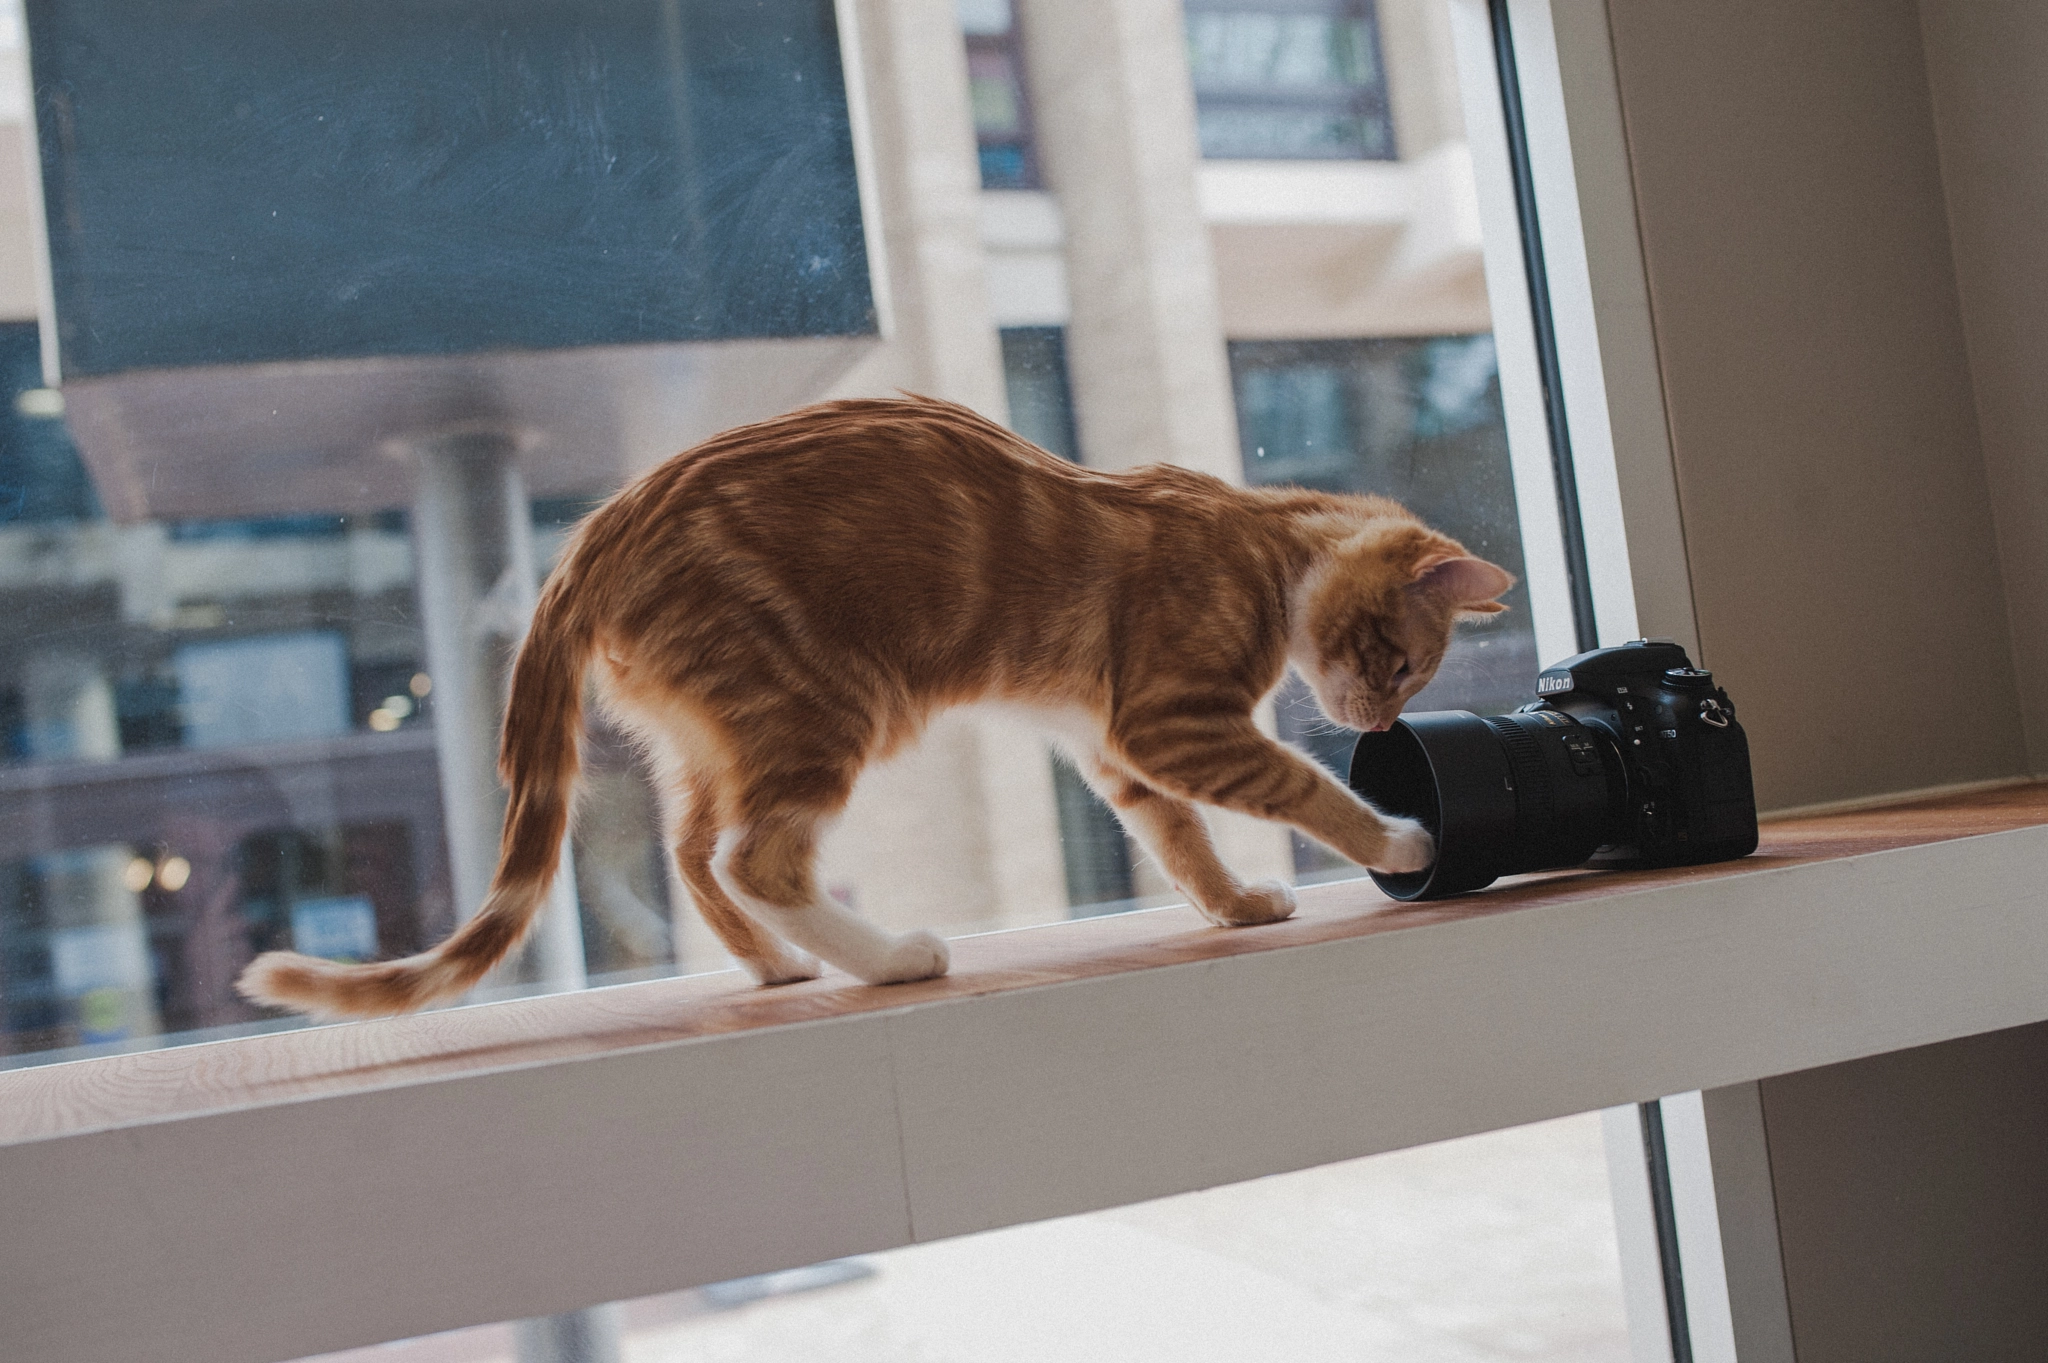 Nikon D3 + Sigma 35mm F1.4 DG HSM Art sample photo. Visiting cats at their office photography